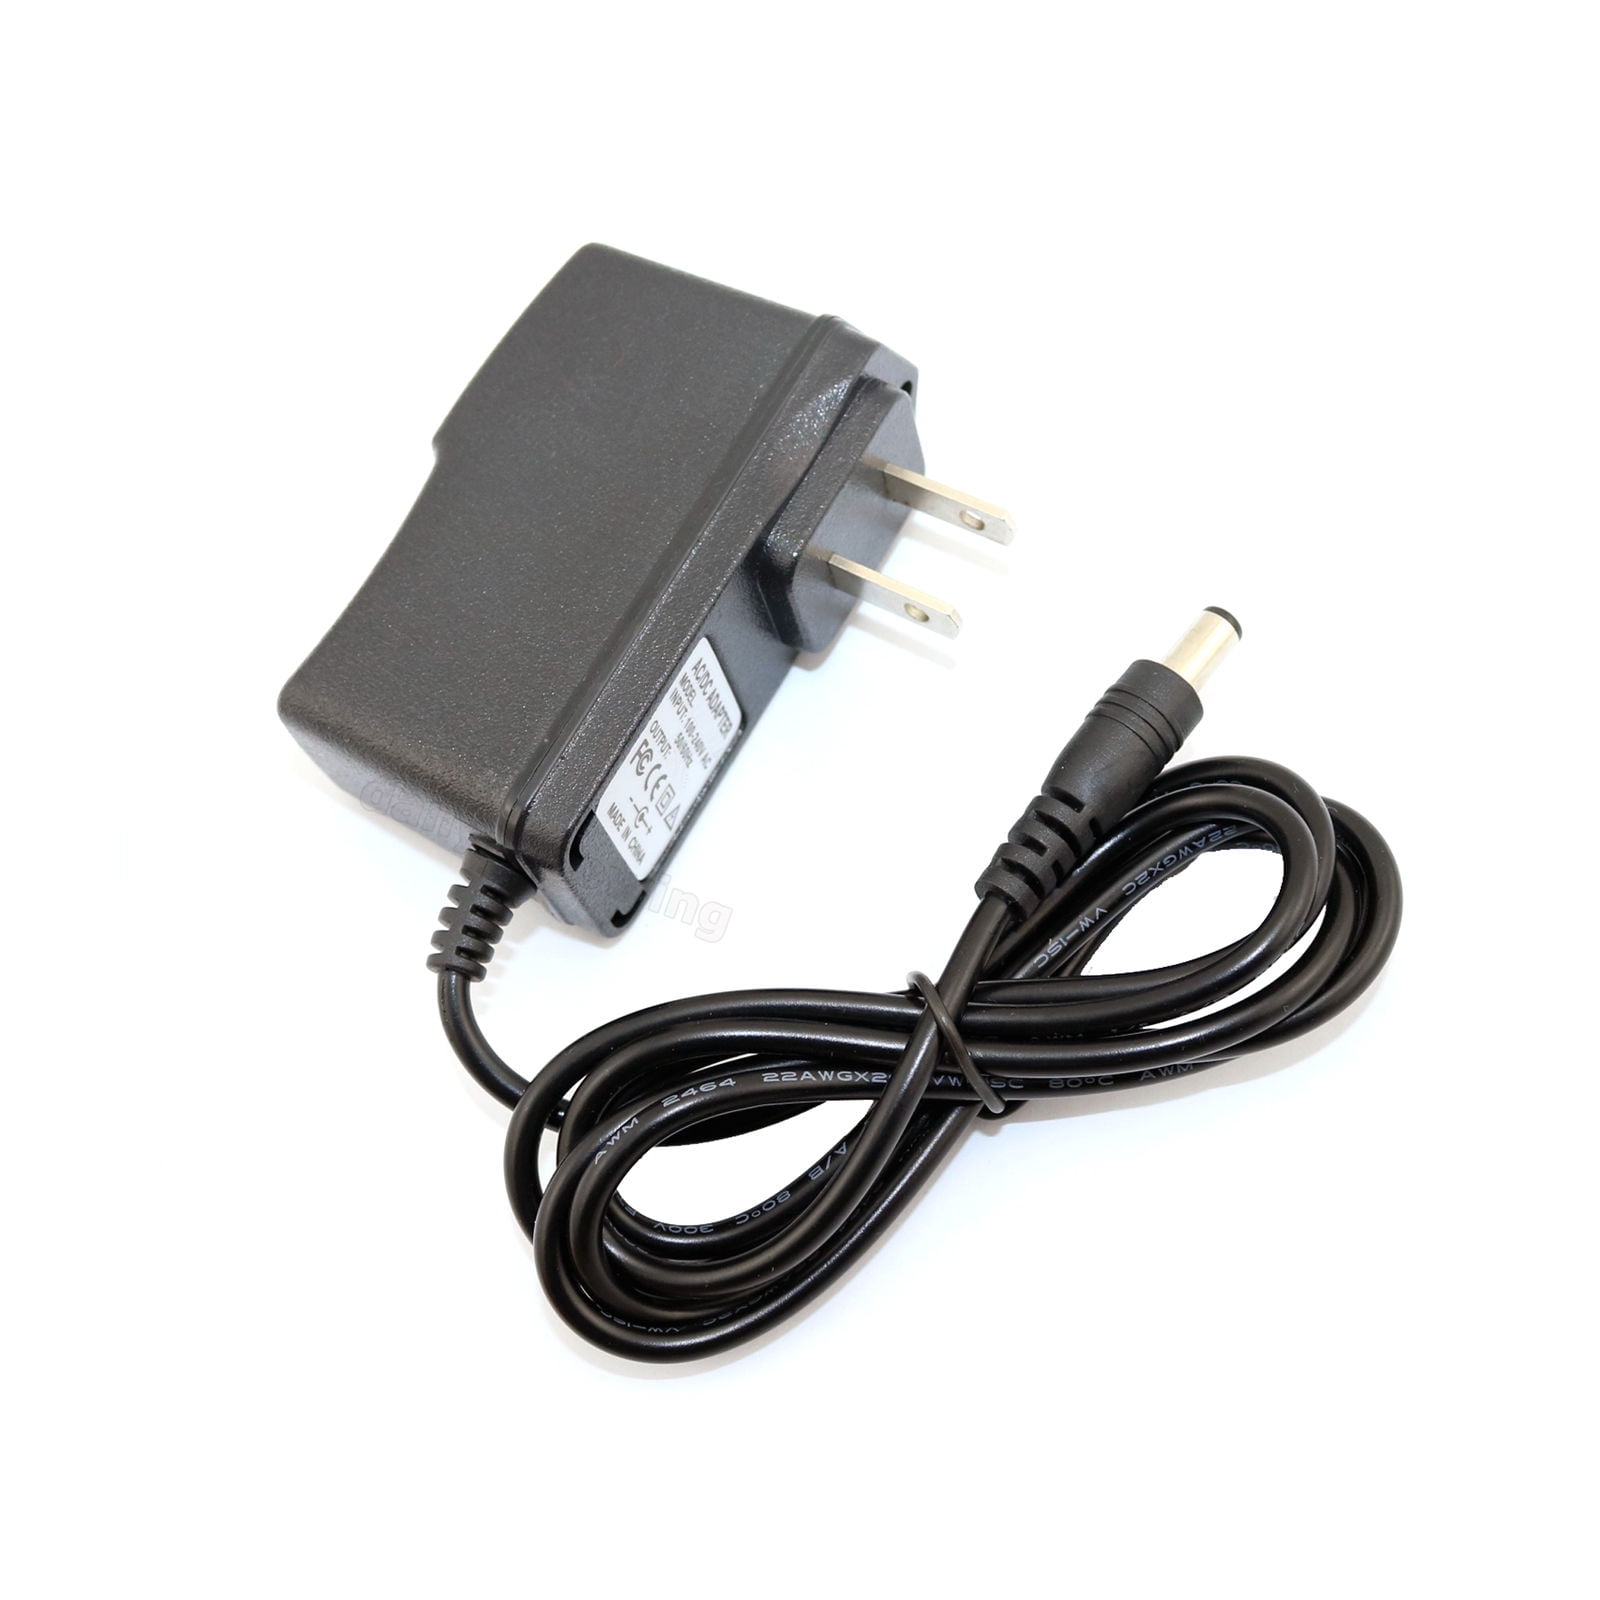 9V 1A AC DC Adapter For Casio CTK-431 CTK-491 Keyboard Charger Power Supply Cord 